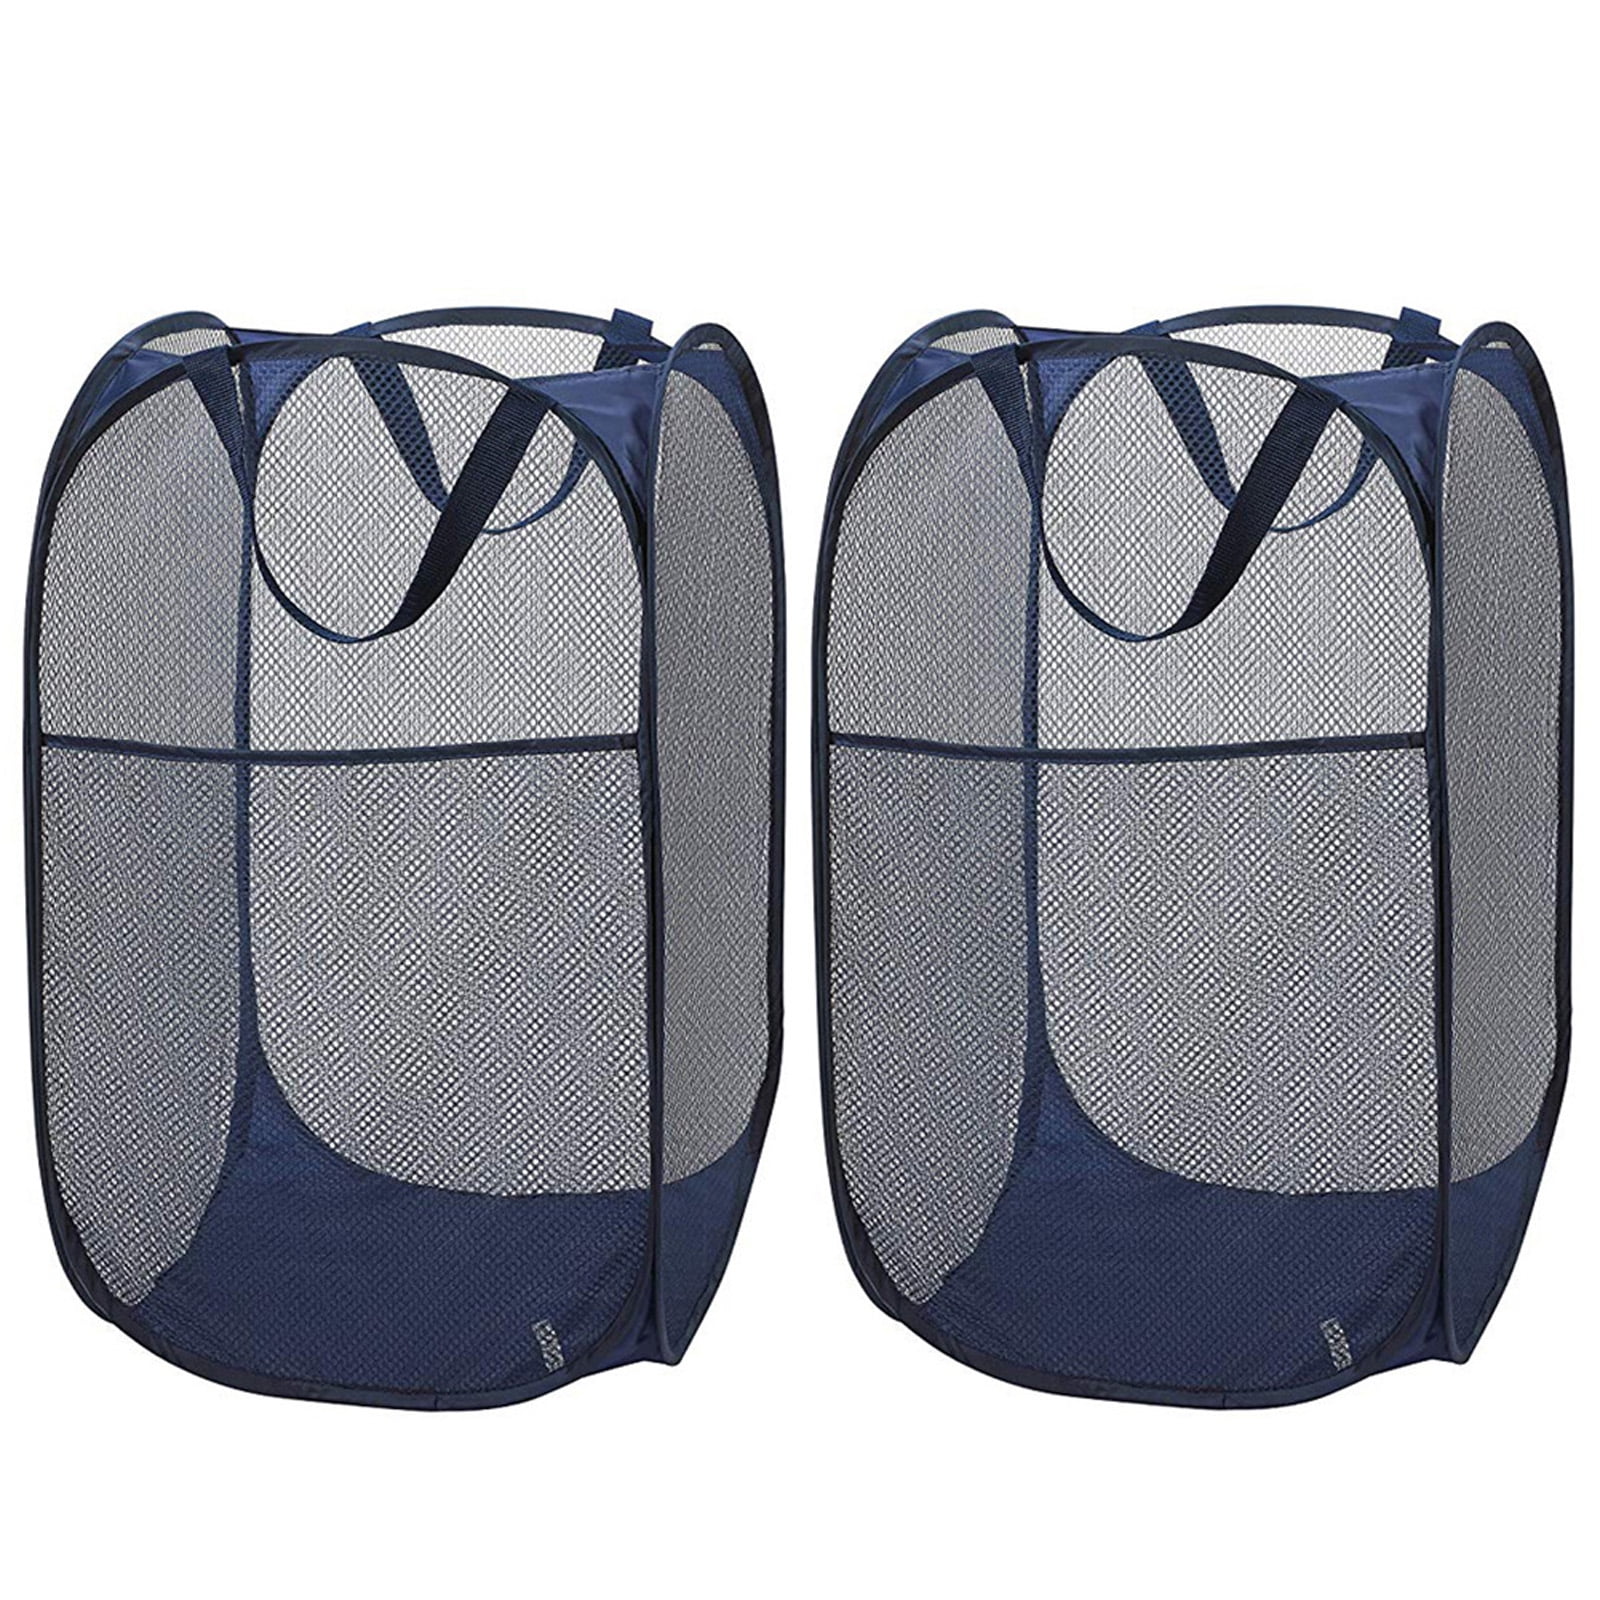 Larpur 2 Packs Popup Mesh Laundry Basket, Collapsible Clothes Washing ...